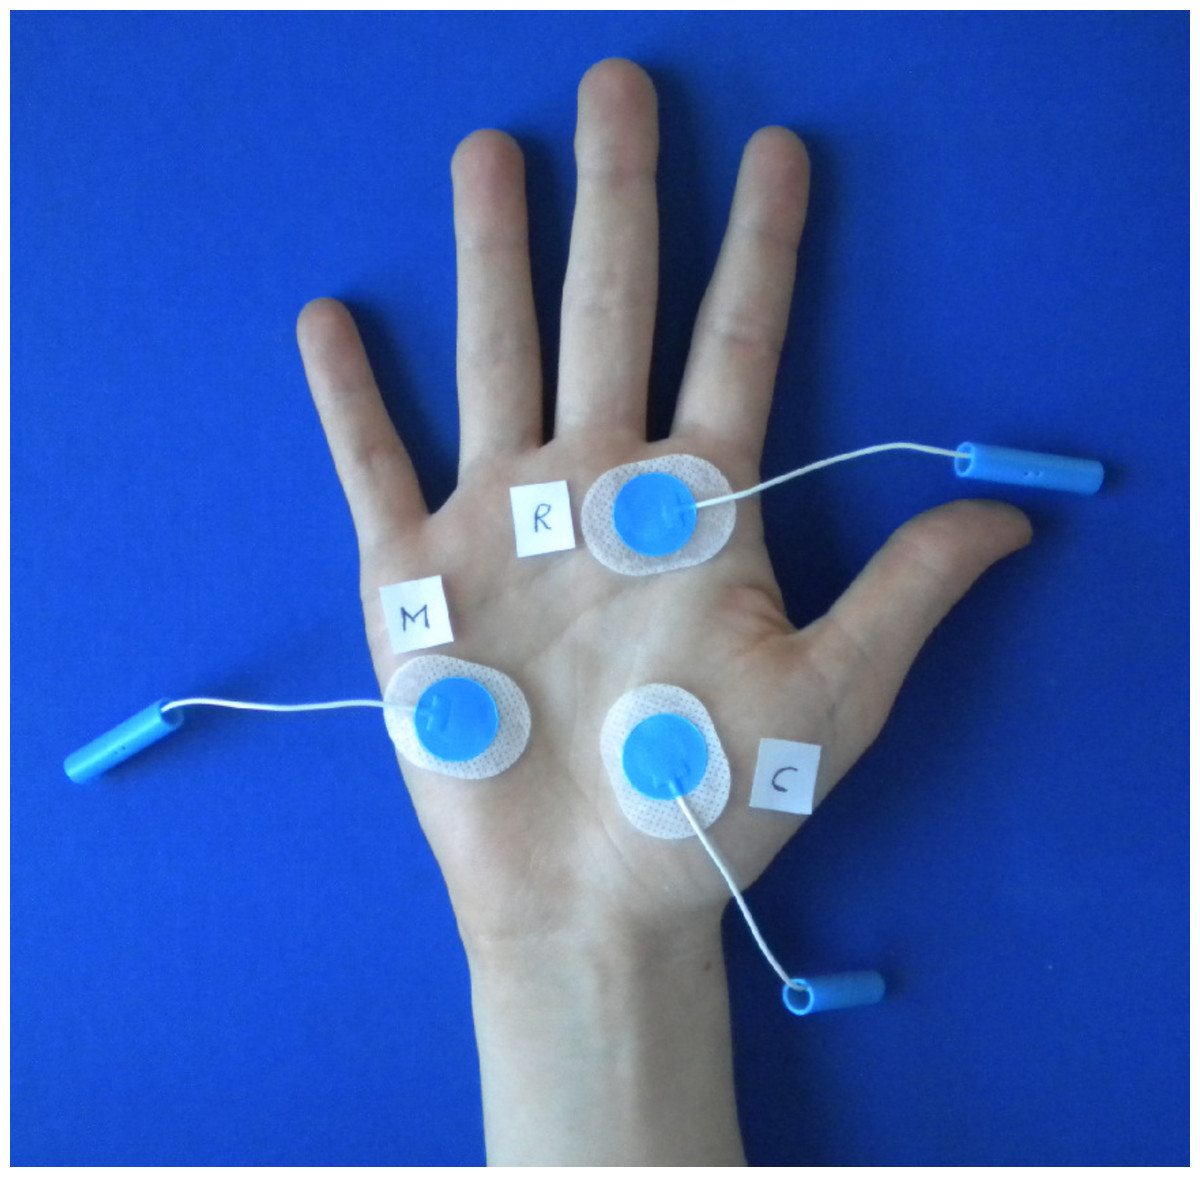 Pain assessment in children undergoing venipuncture: the Wong–Baker faces  scale versus skin conductance fluctuations [PeerJ]